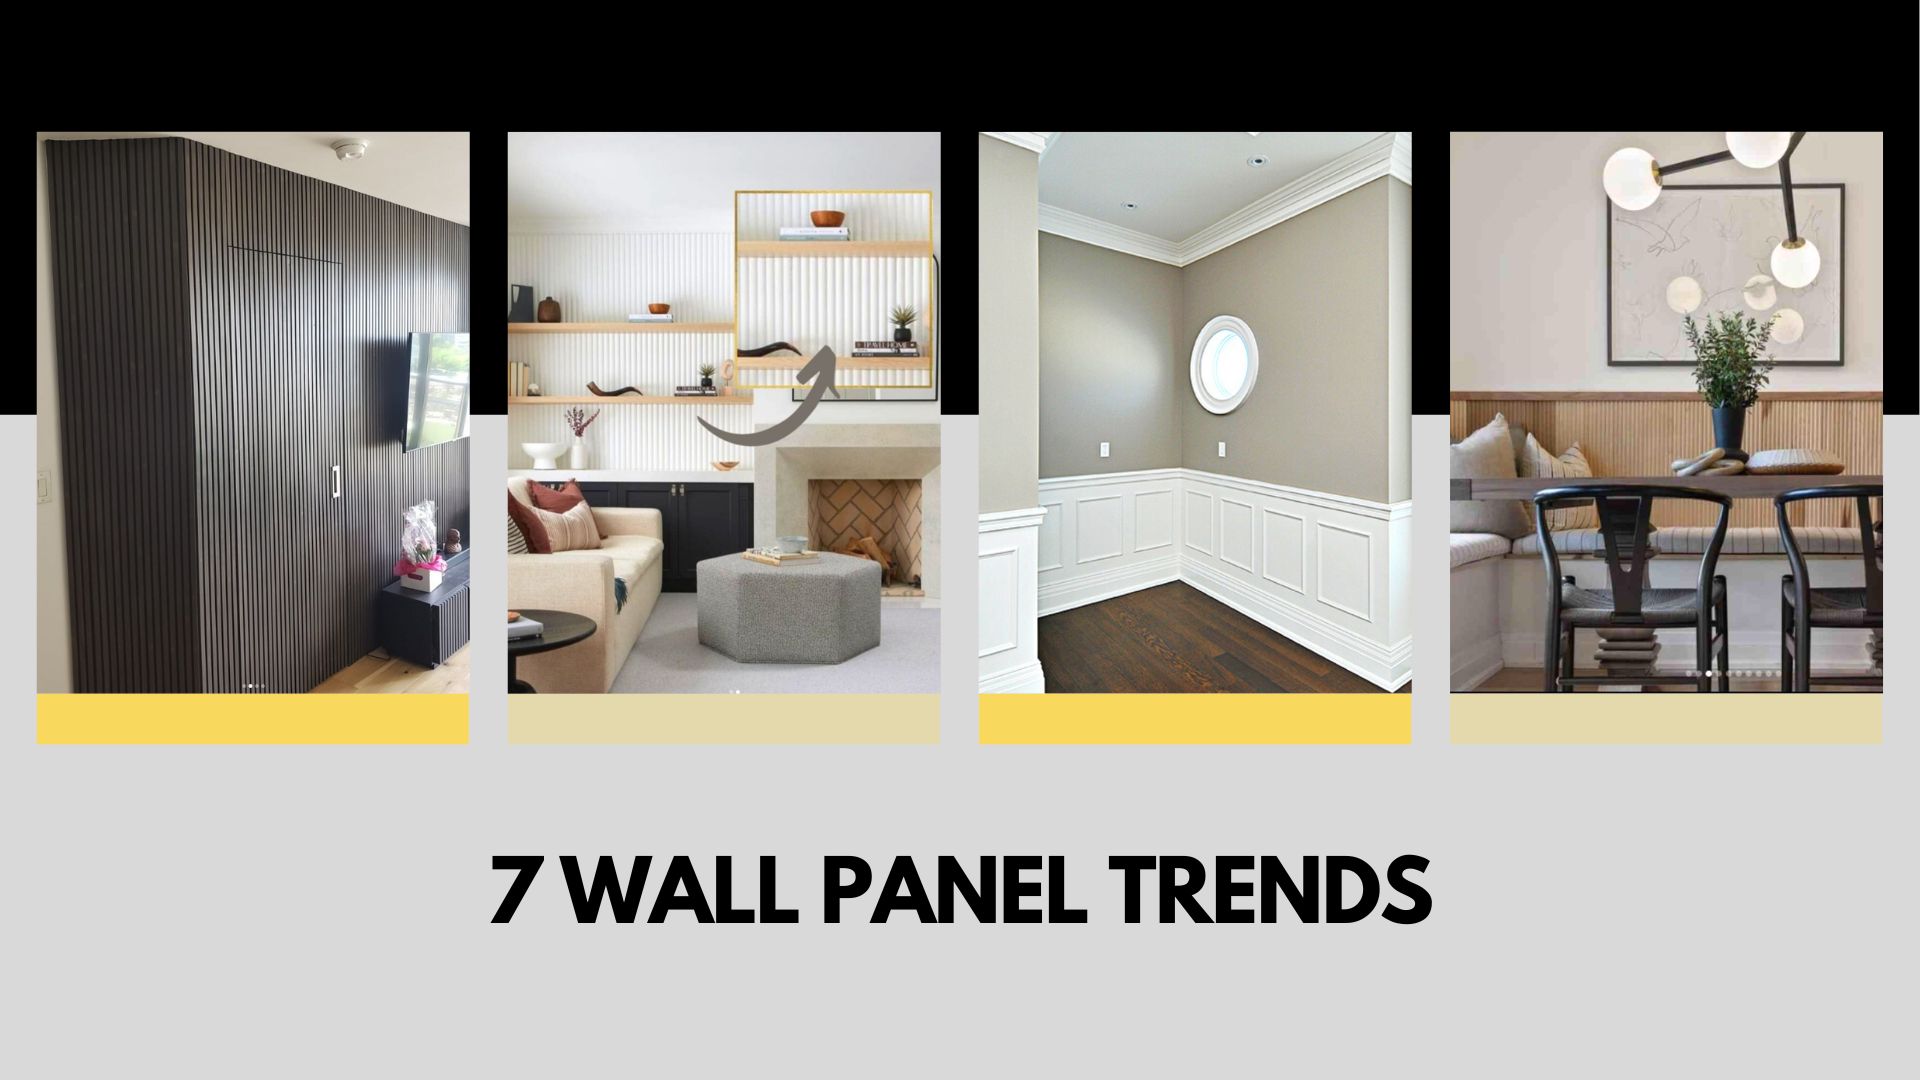 Wall panel trends